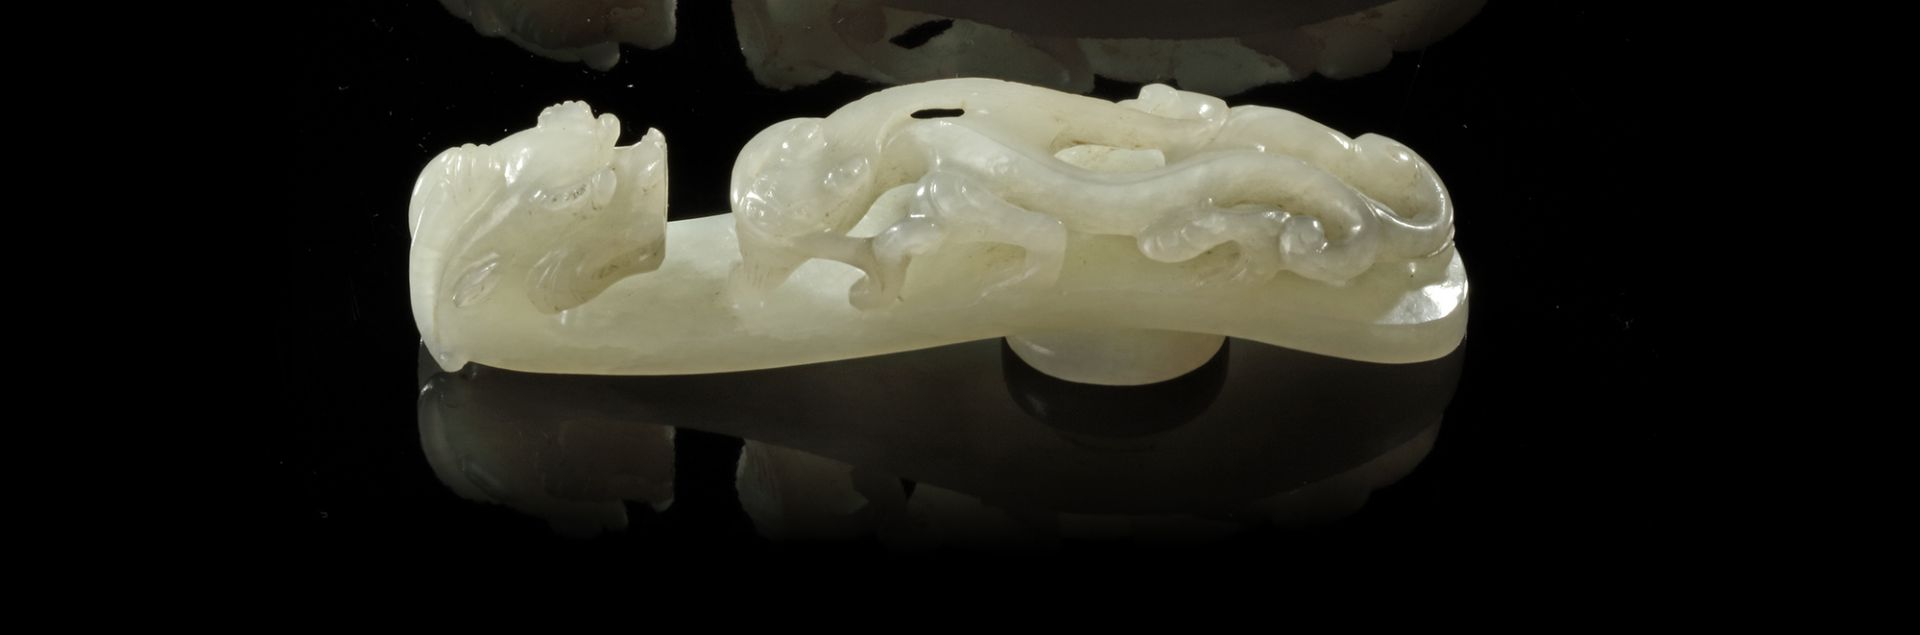 A CHINESE JADE BELT HOOK, 19TH-20TH CENTURY - Image 2 of 6